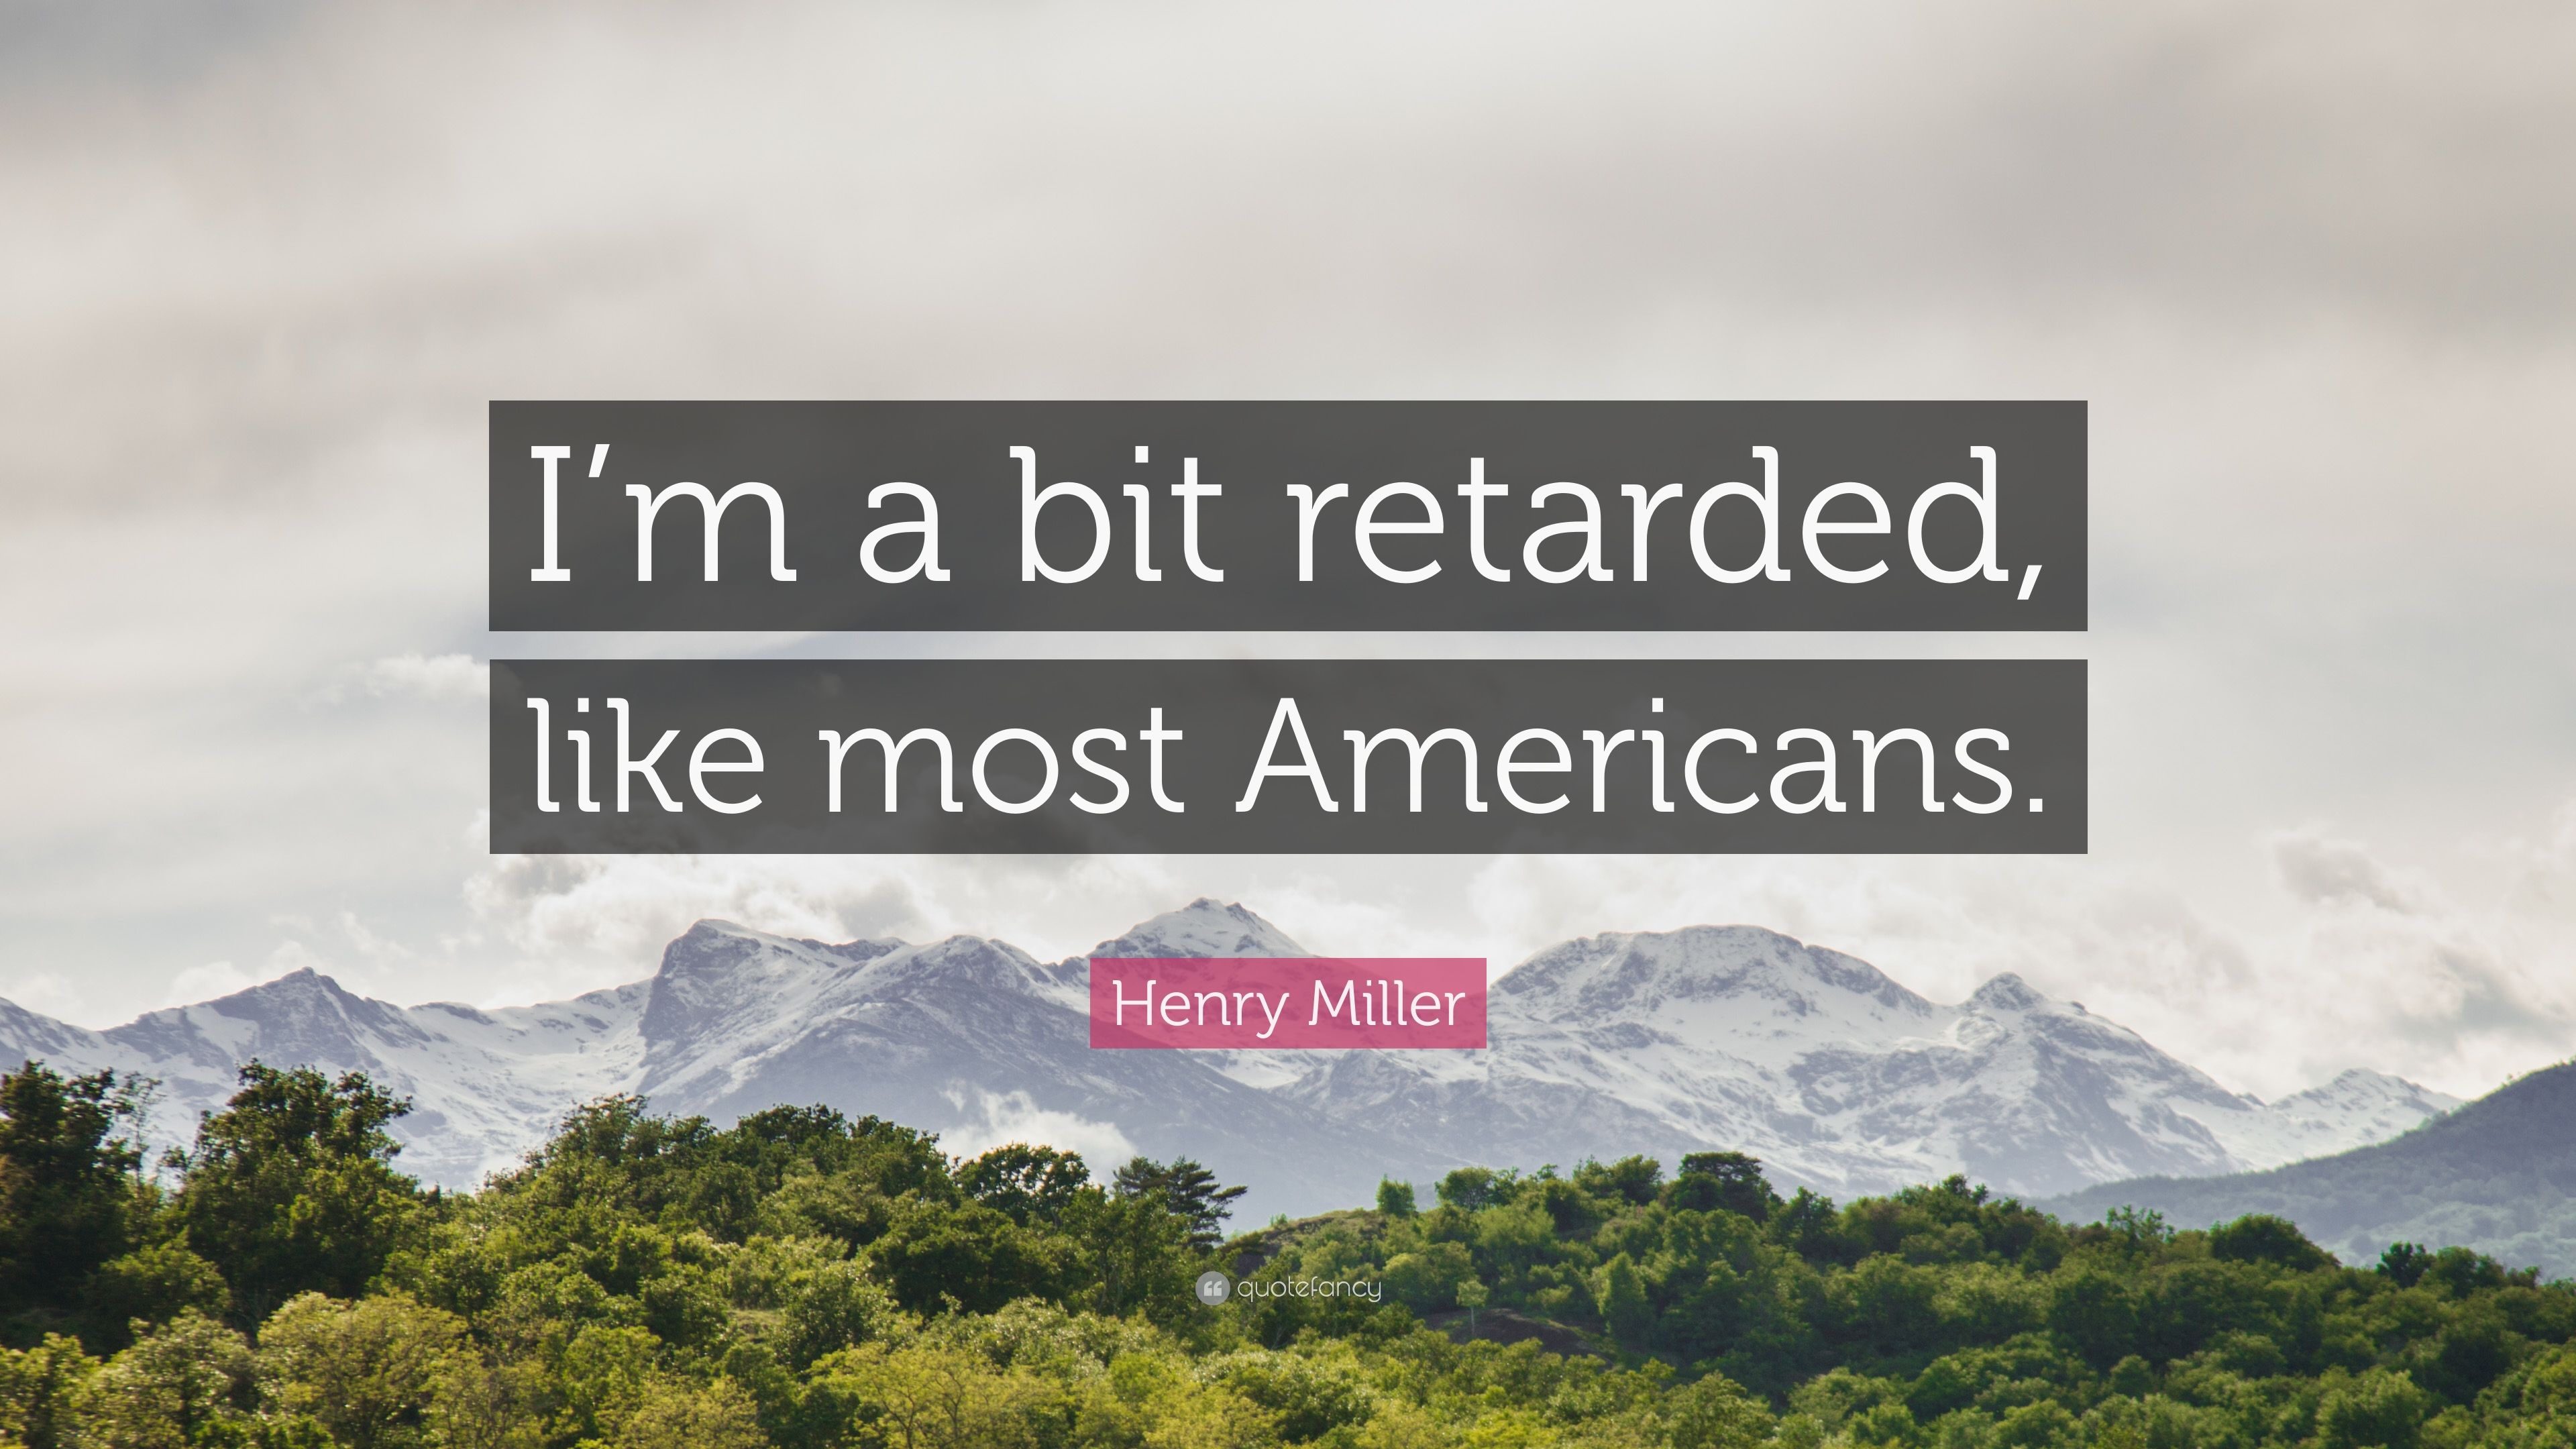 Henry Miller Quote: “I'm a bit retarded, like most Americans.” 7